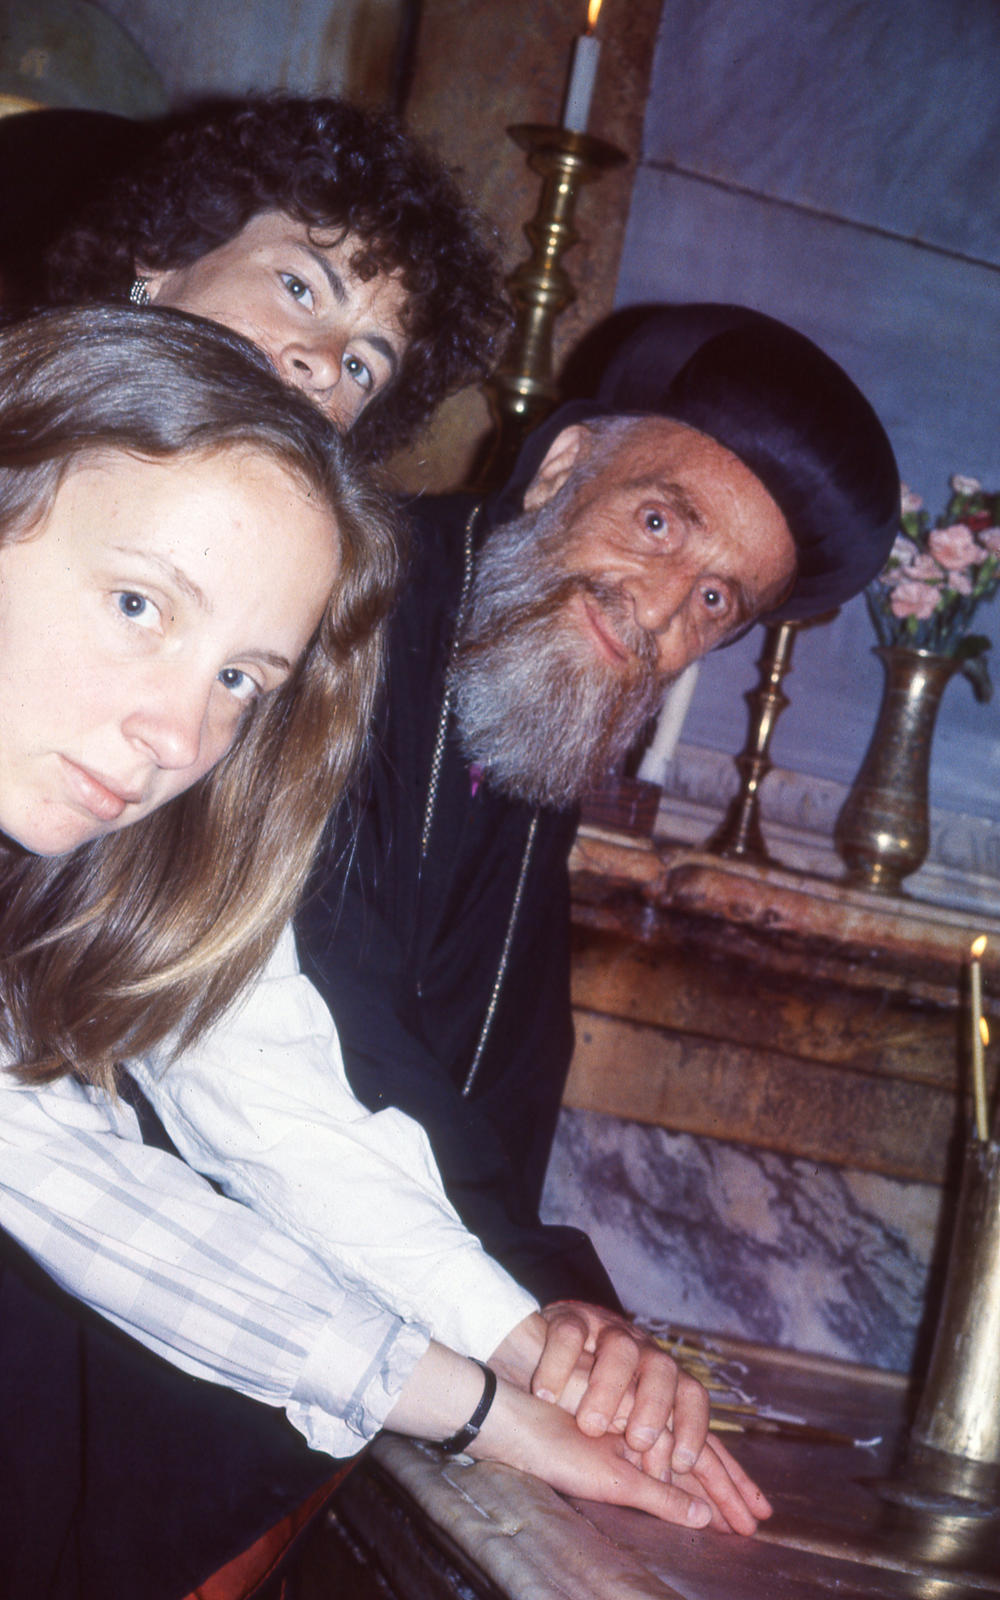 At the Church of the Holy Sepulchre, Archbishop Jajjawi offered to perform an ancient ritual that would join Darling Young, left, and Harvey as sisters.